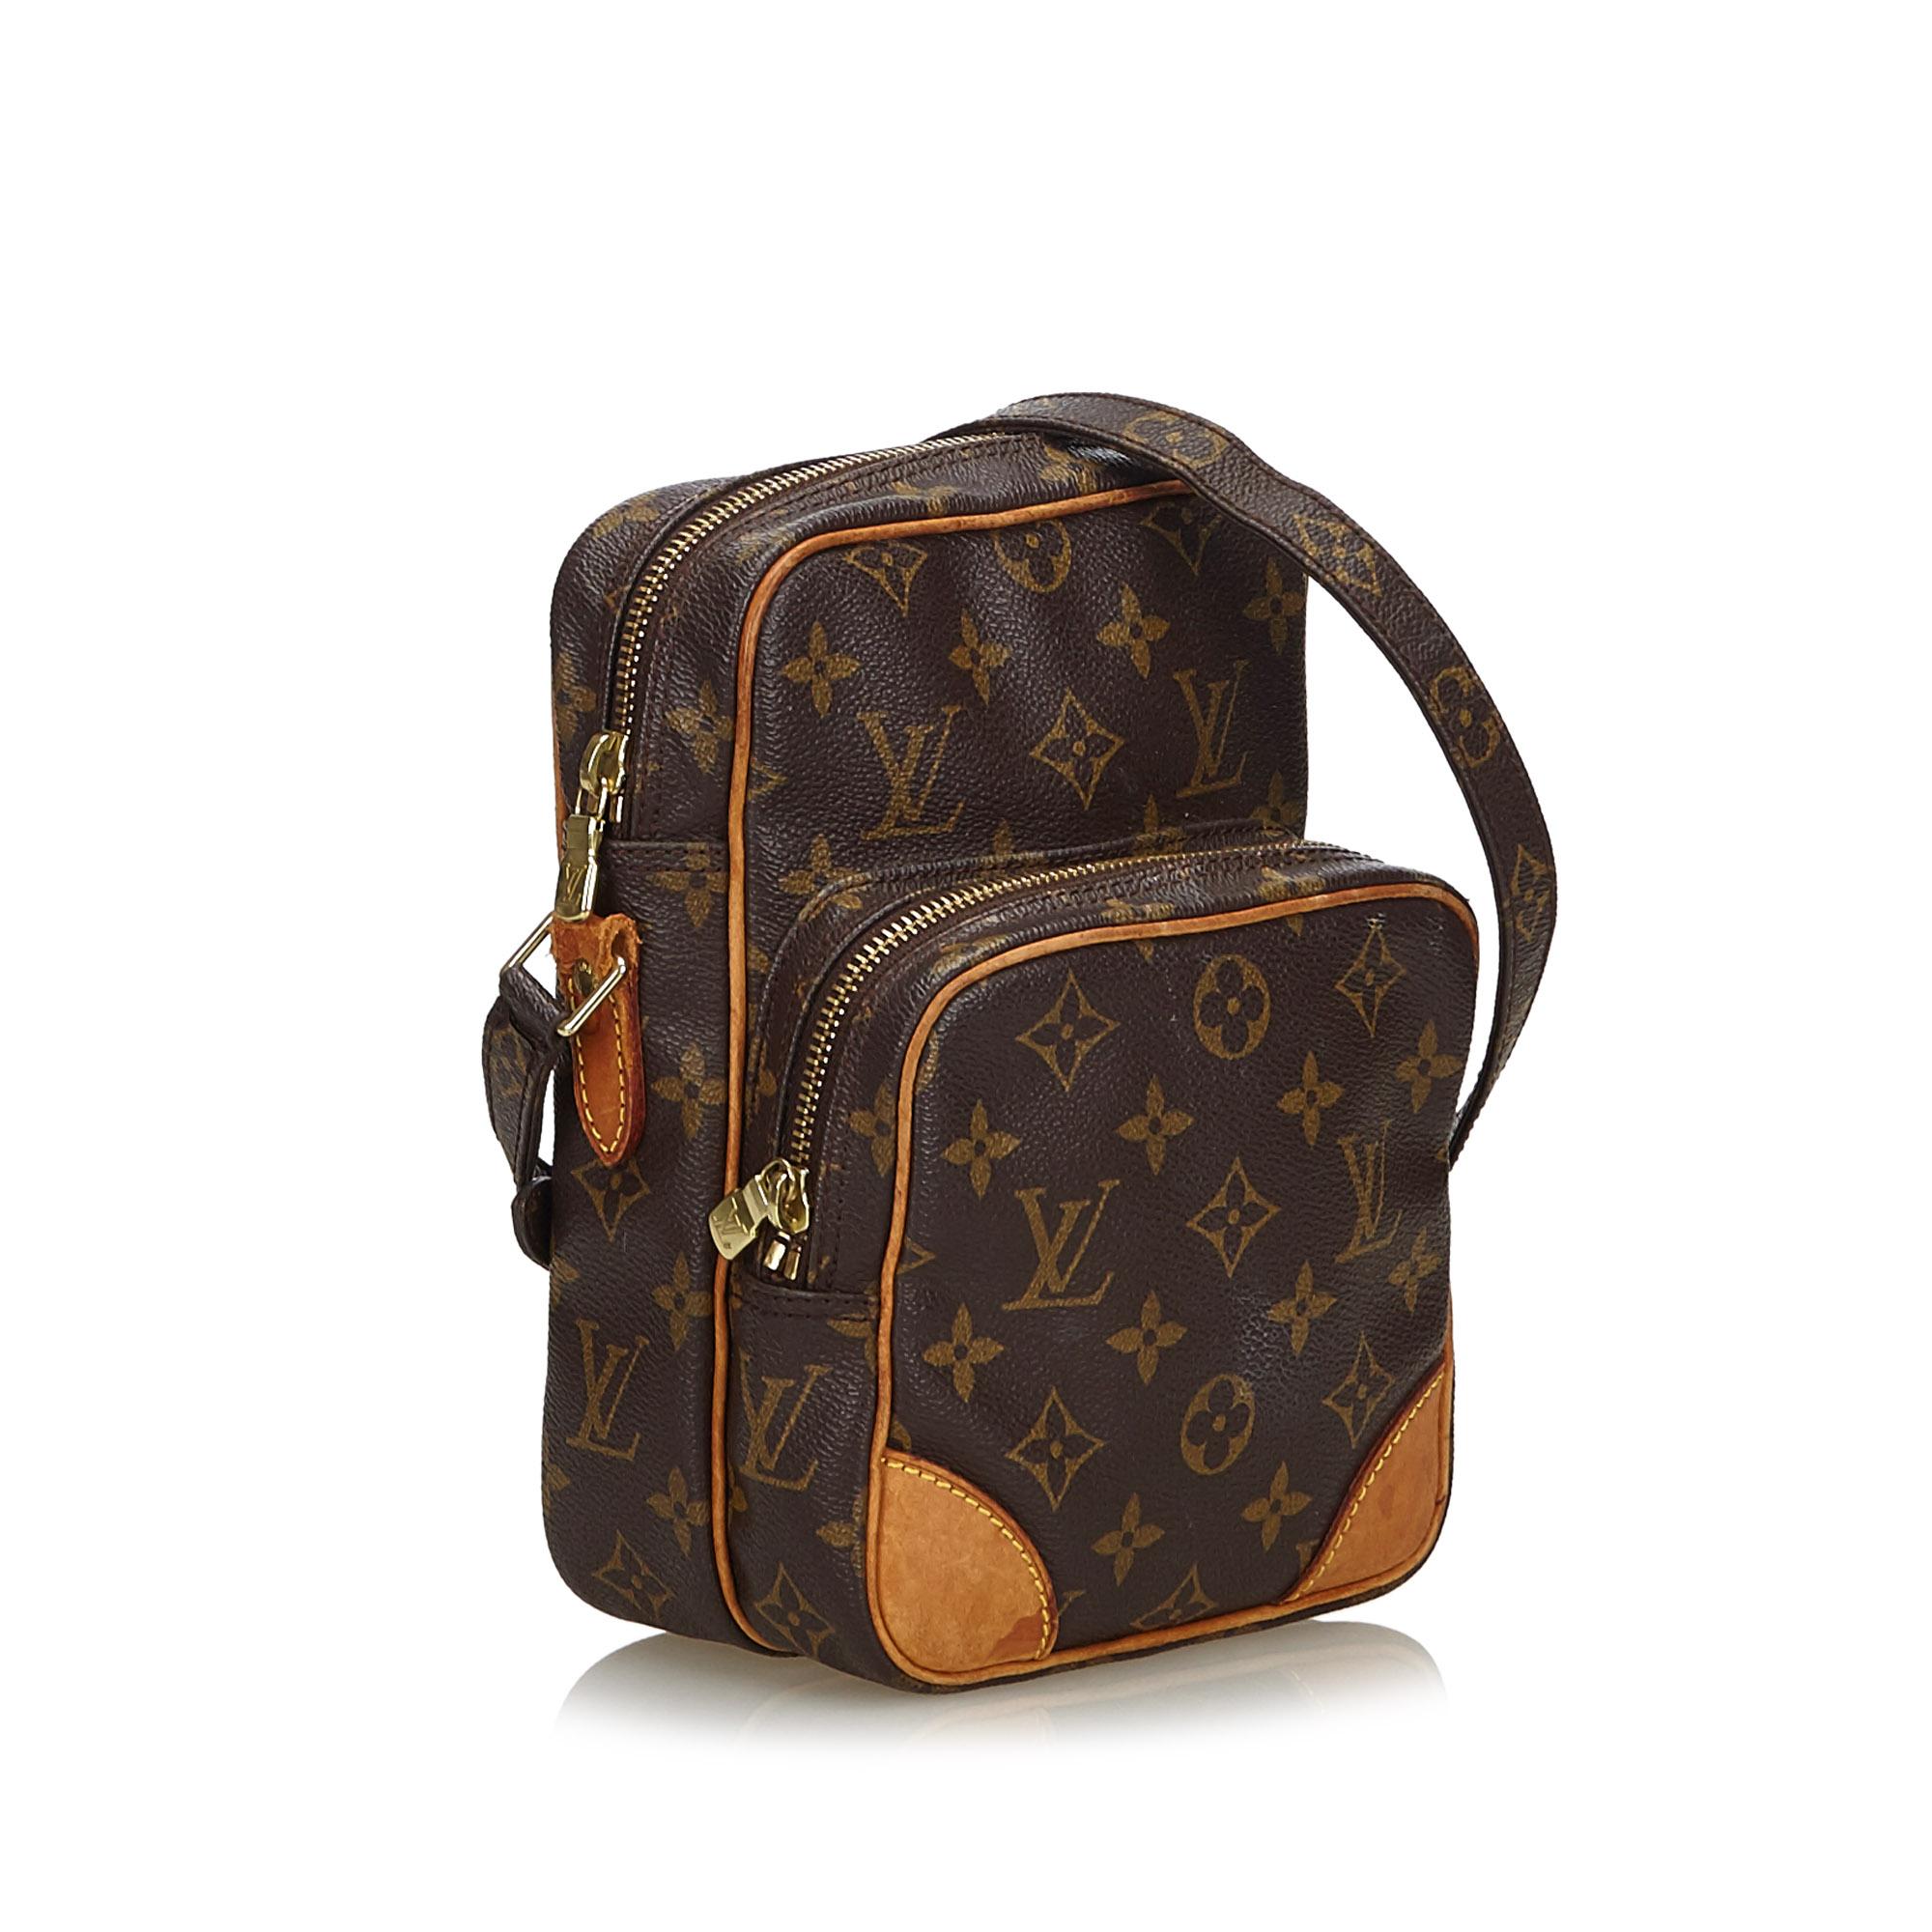 The Amazone features a monogram canvas body, a front exterior zip pocket, an adjustable shoulder strap, a top zip closure, and an interior slip pocket. It carries as B condition rating.

Inclusions: 
Dust Bag


Louis Vuitton pieces do not come with